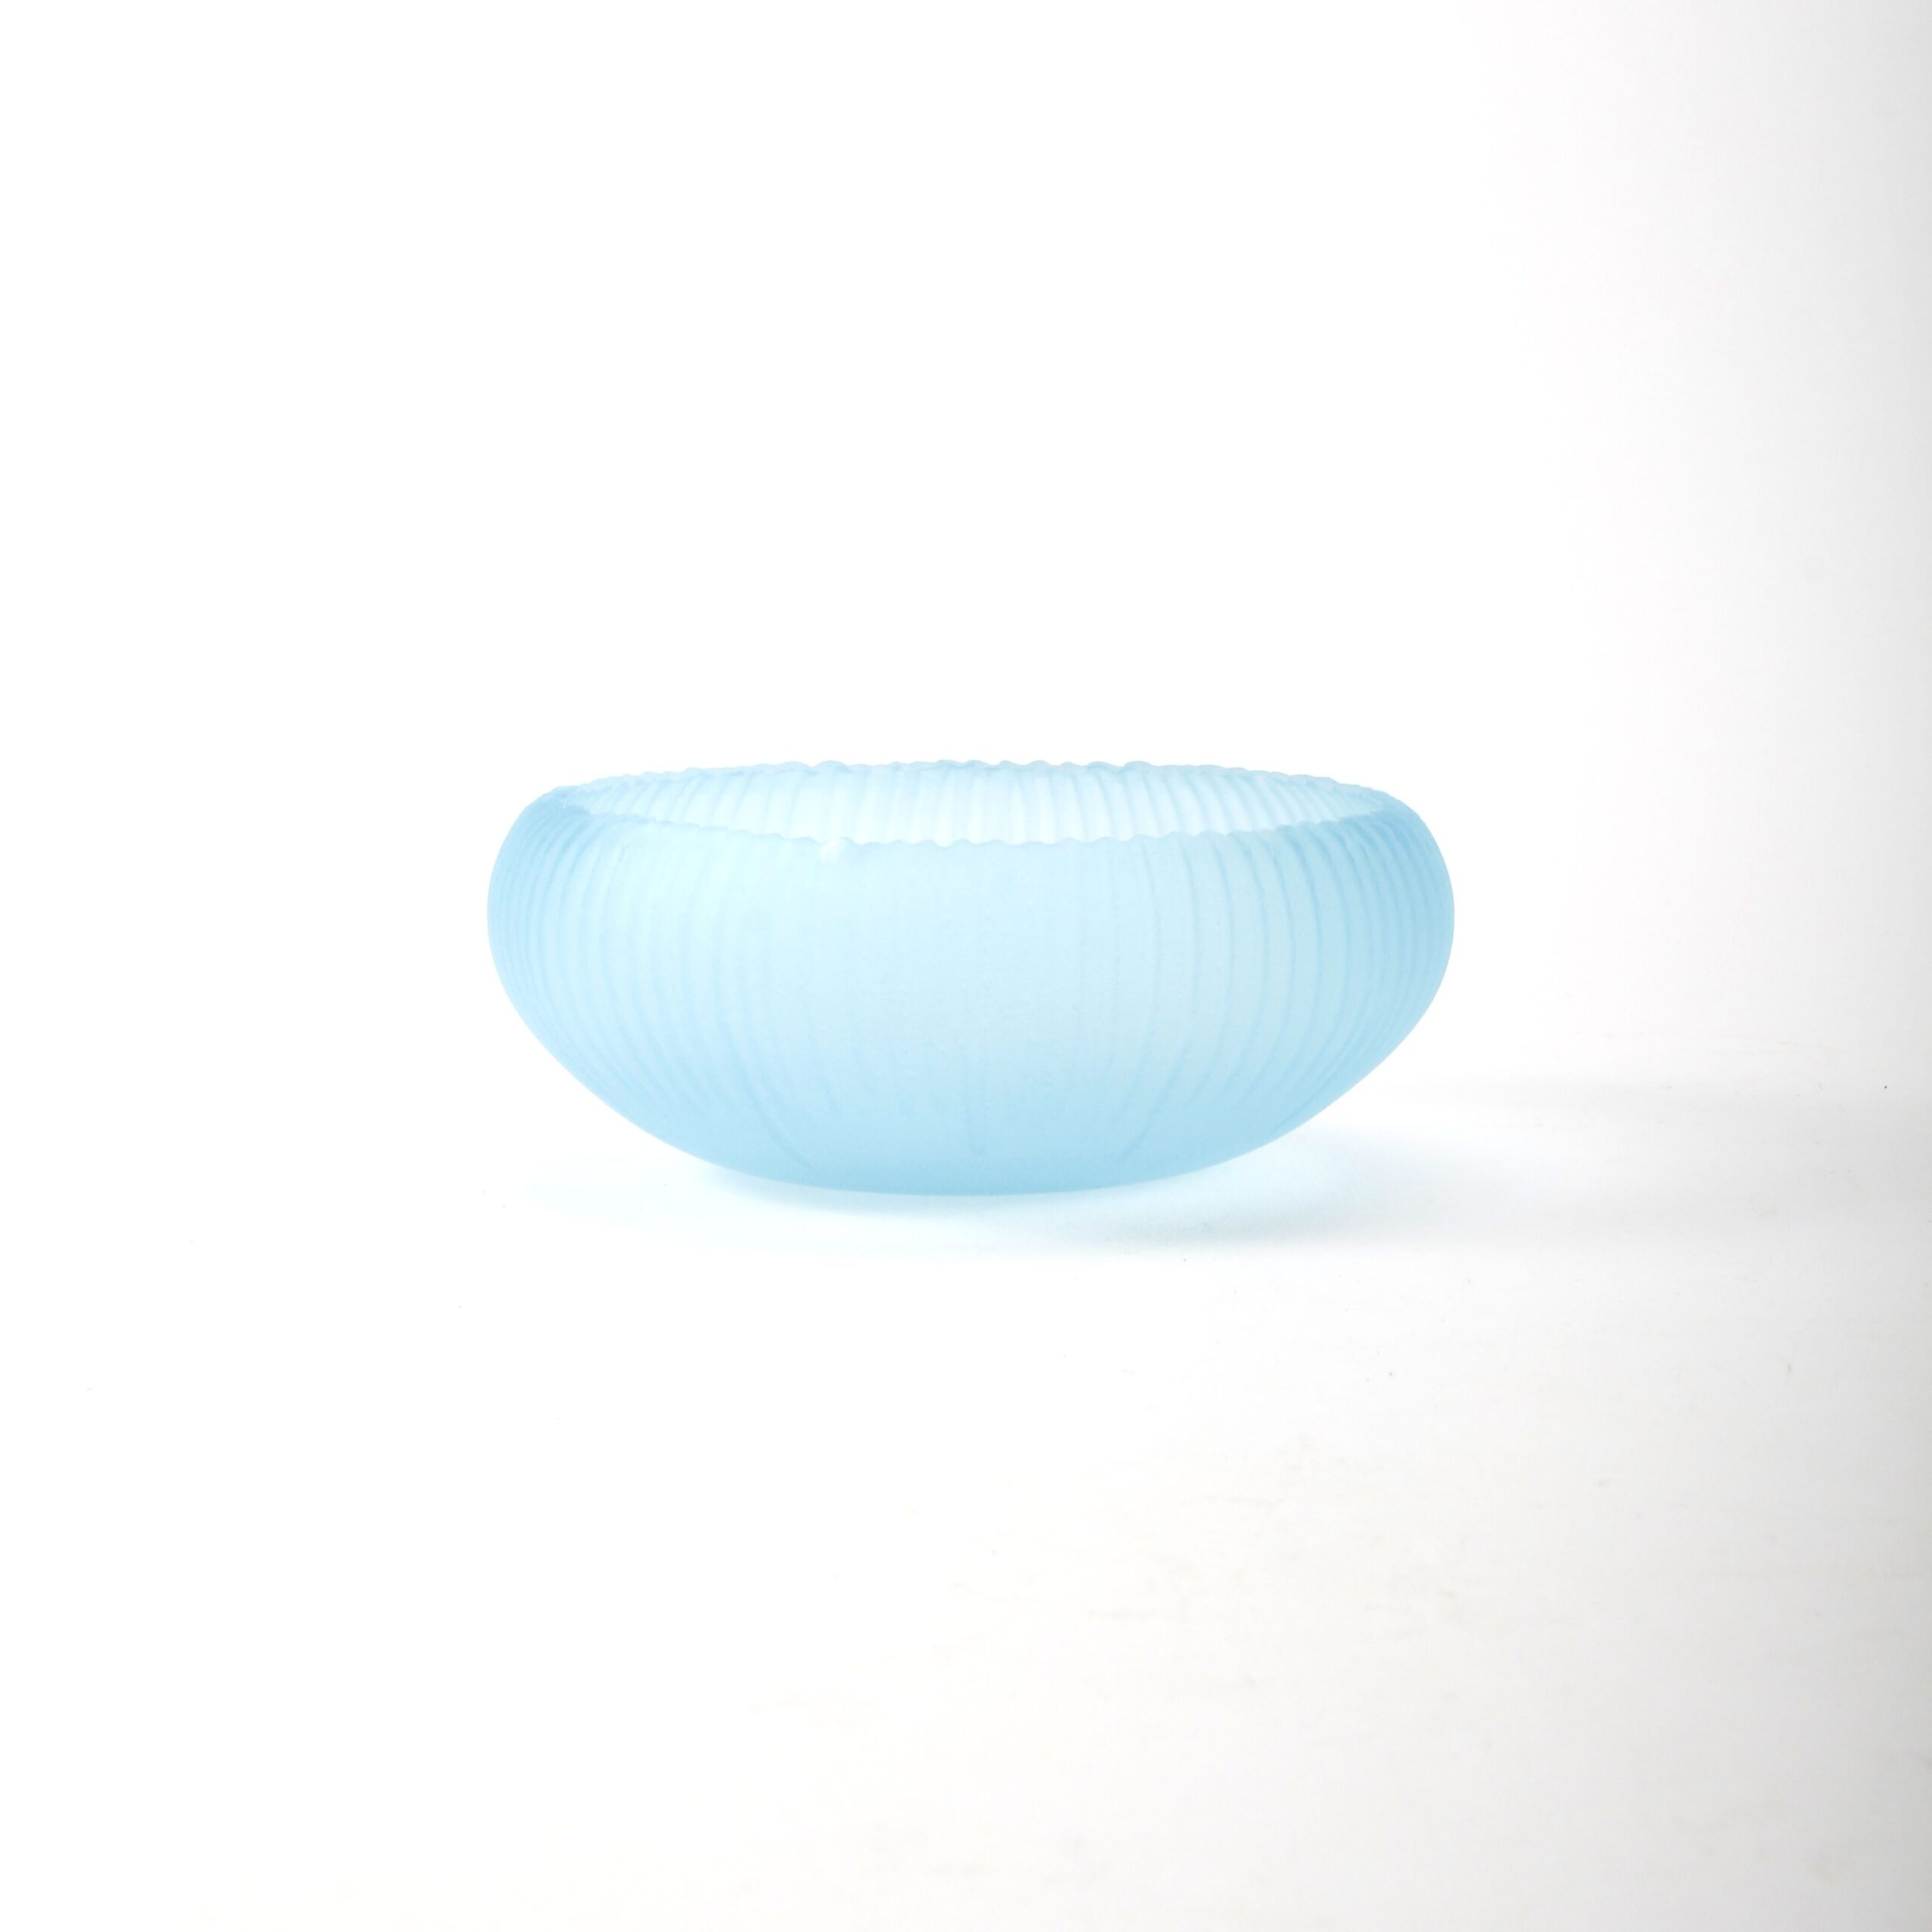 Courtney Downman: Aqua Bowl Carved Ring Dish Product Image 2 of 3